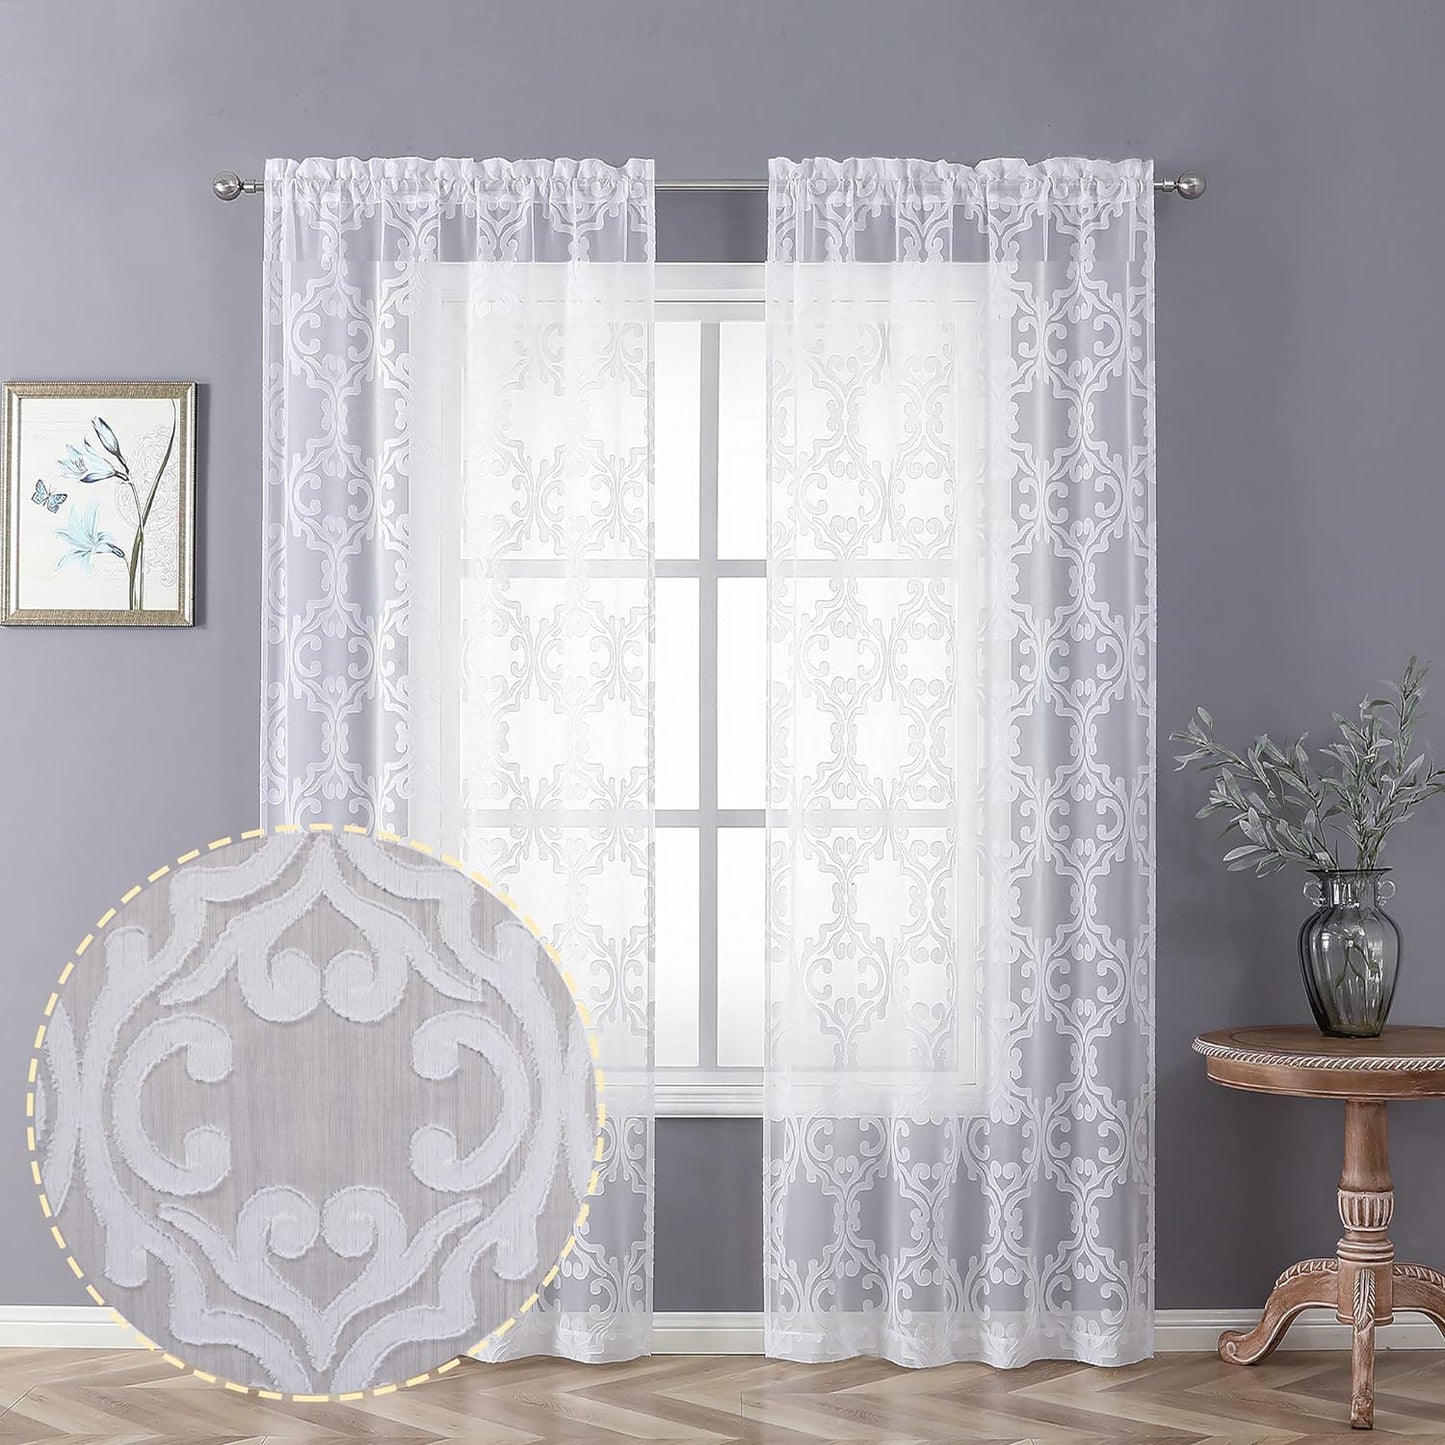 Aiyufeng Suri 2 Panels Sheer Sage Green Curtains 63 Inches Long, Light & Airy Privacy Textured Sheer Drapes, Dual Rod Pocket Voile Clipped Floral Luxury Panels for Bedroom Living Room, 42 X 63 Inch  Aiyufeng White 2X42X72" 